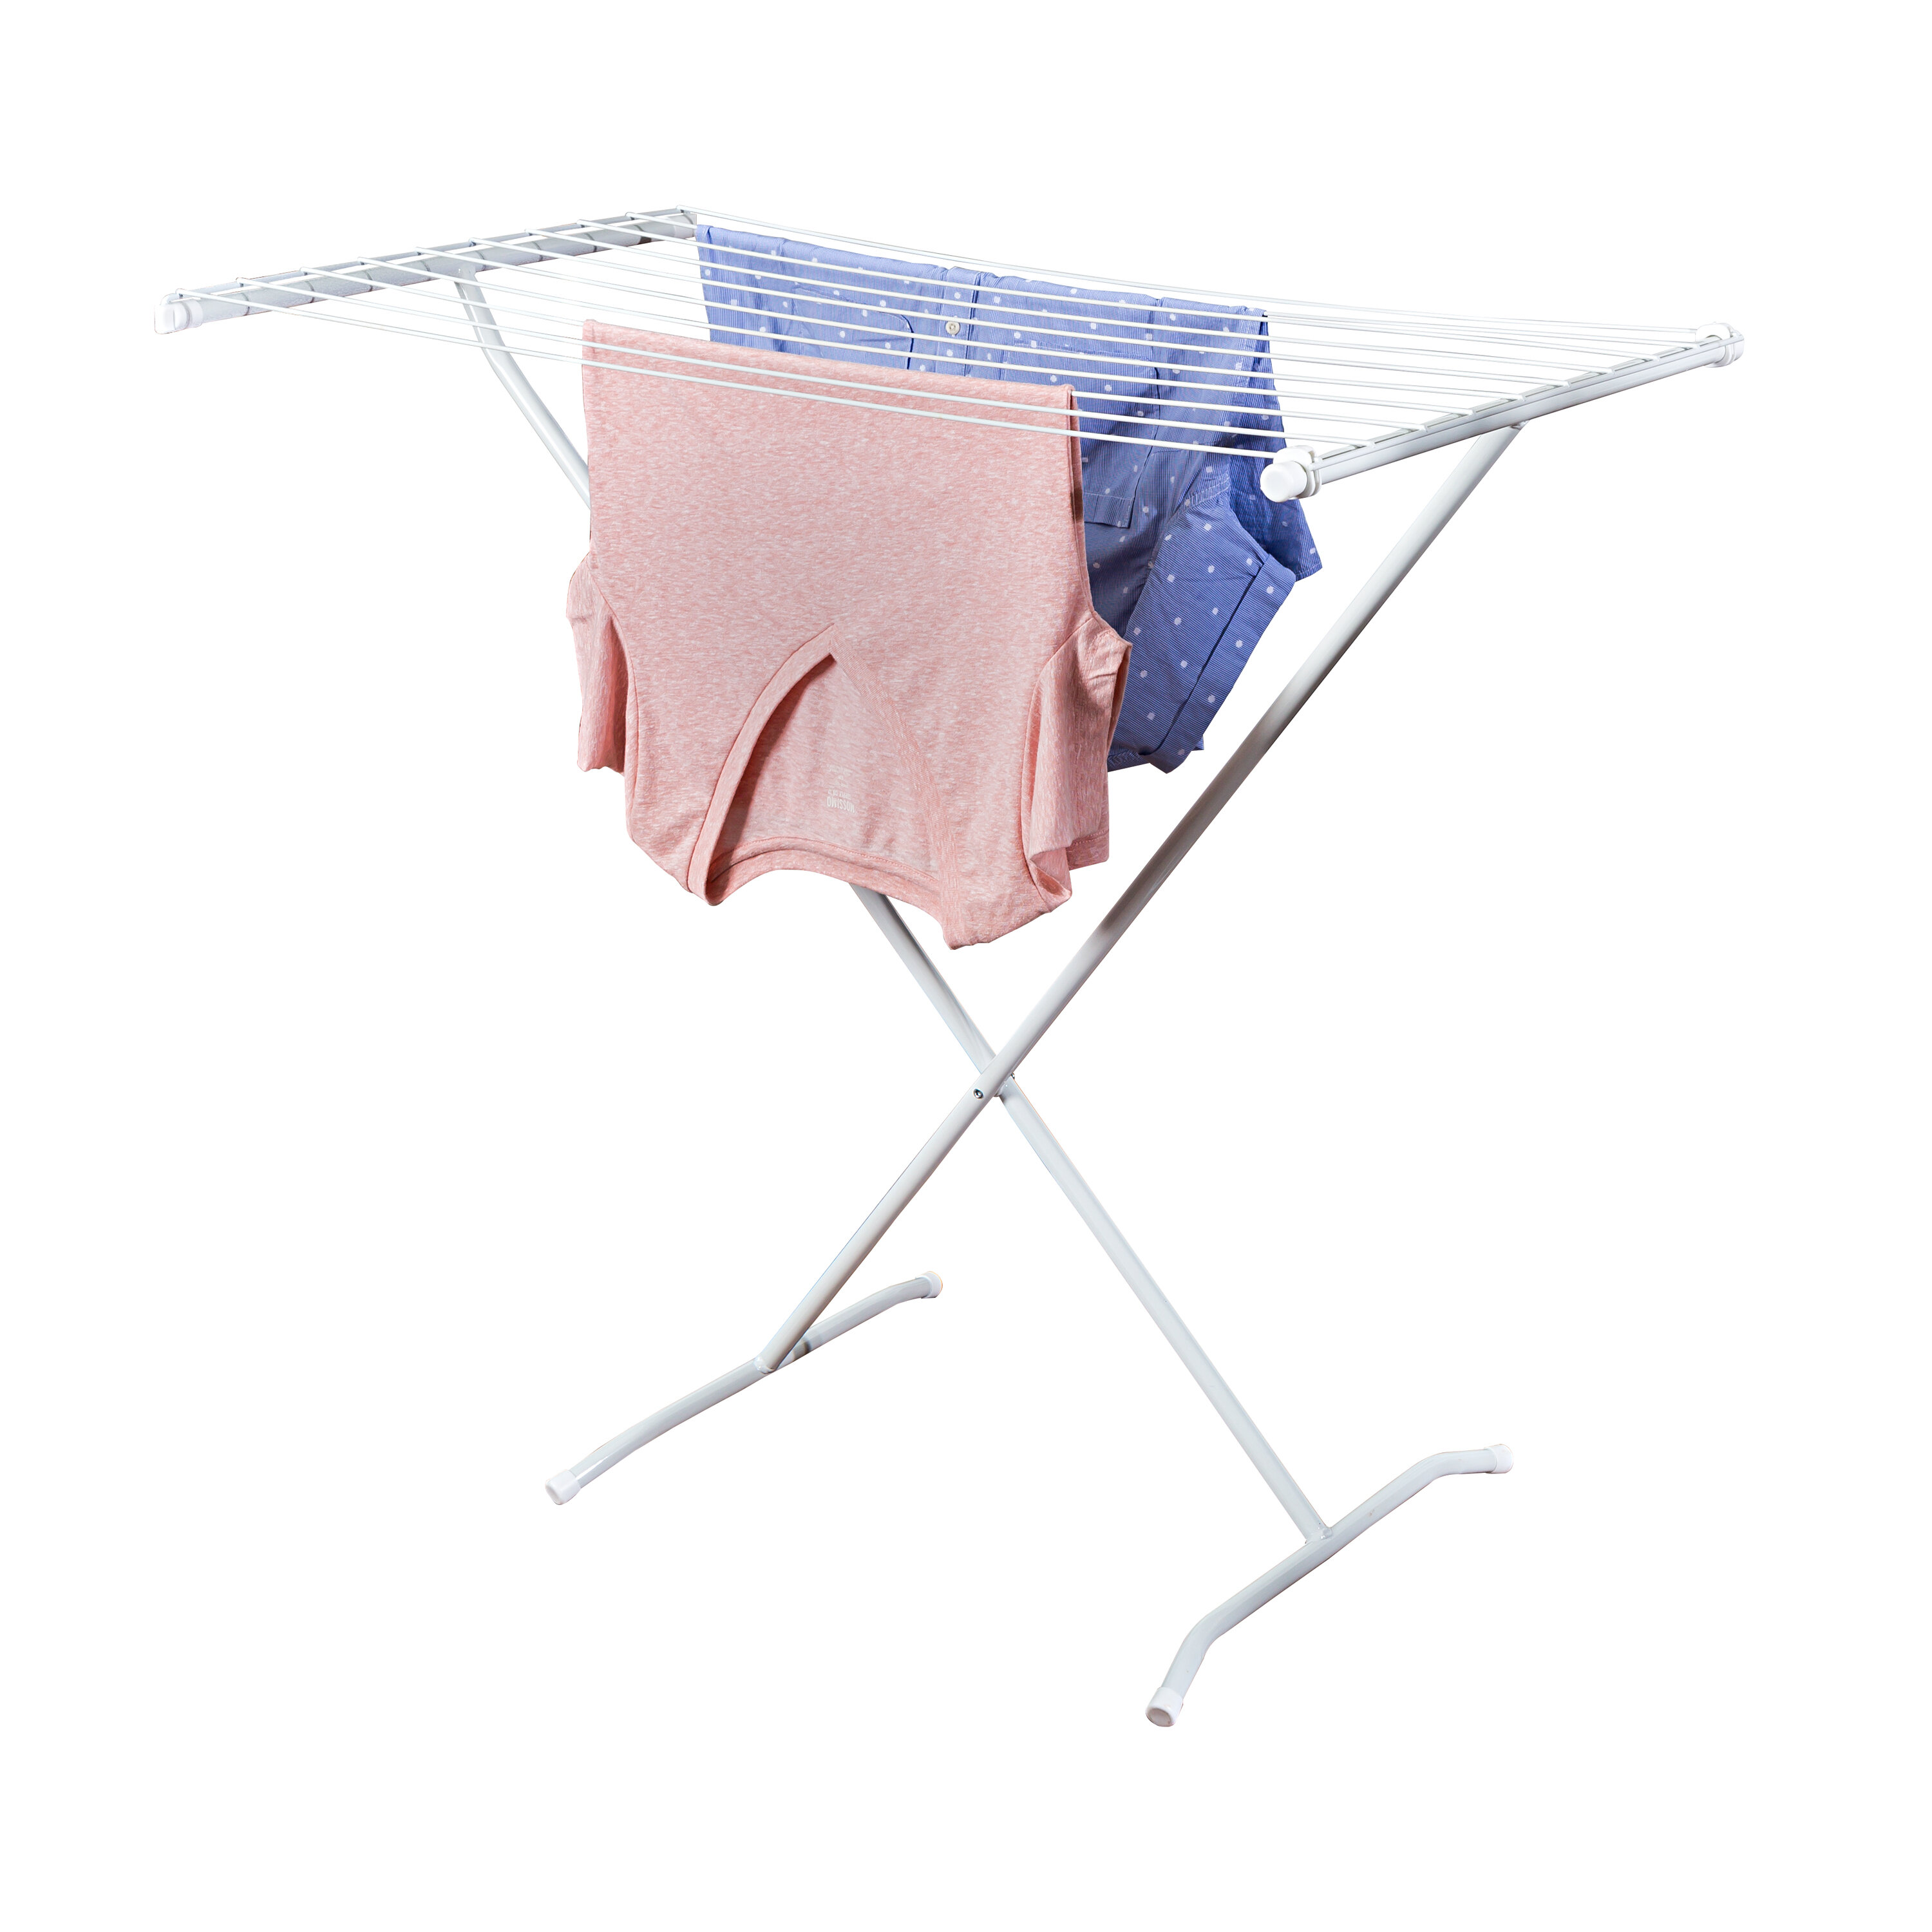 Details about   ❤ Foldable Socks Cloth Hanger 16 Clips Multifunction Underwear Drying Racks 